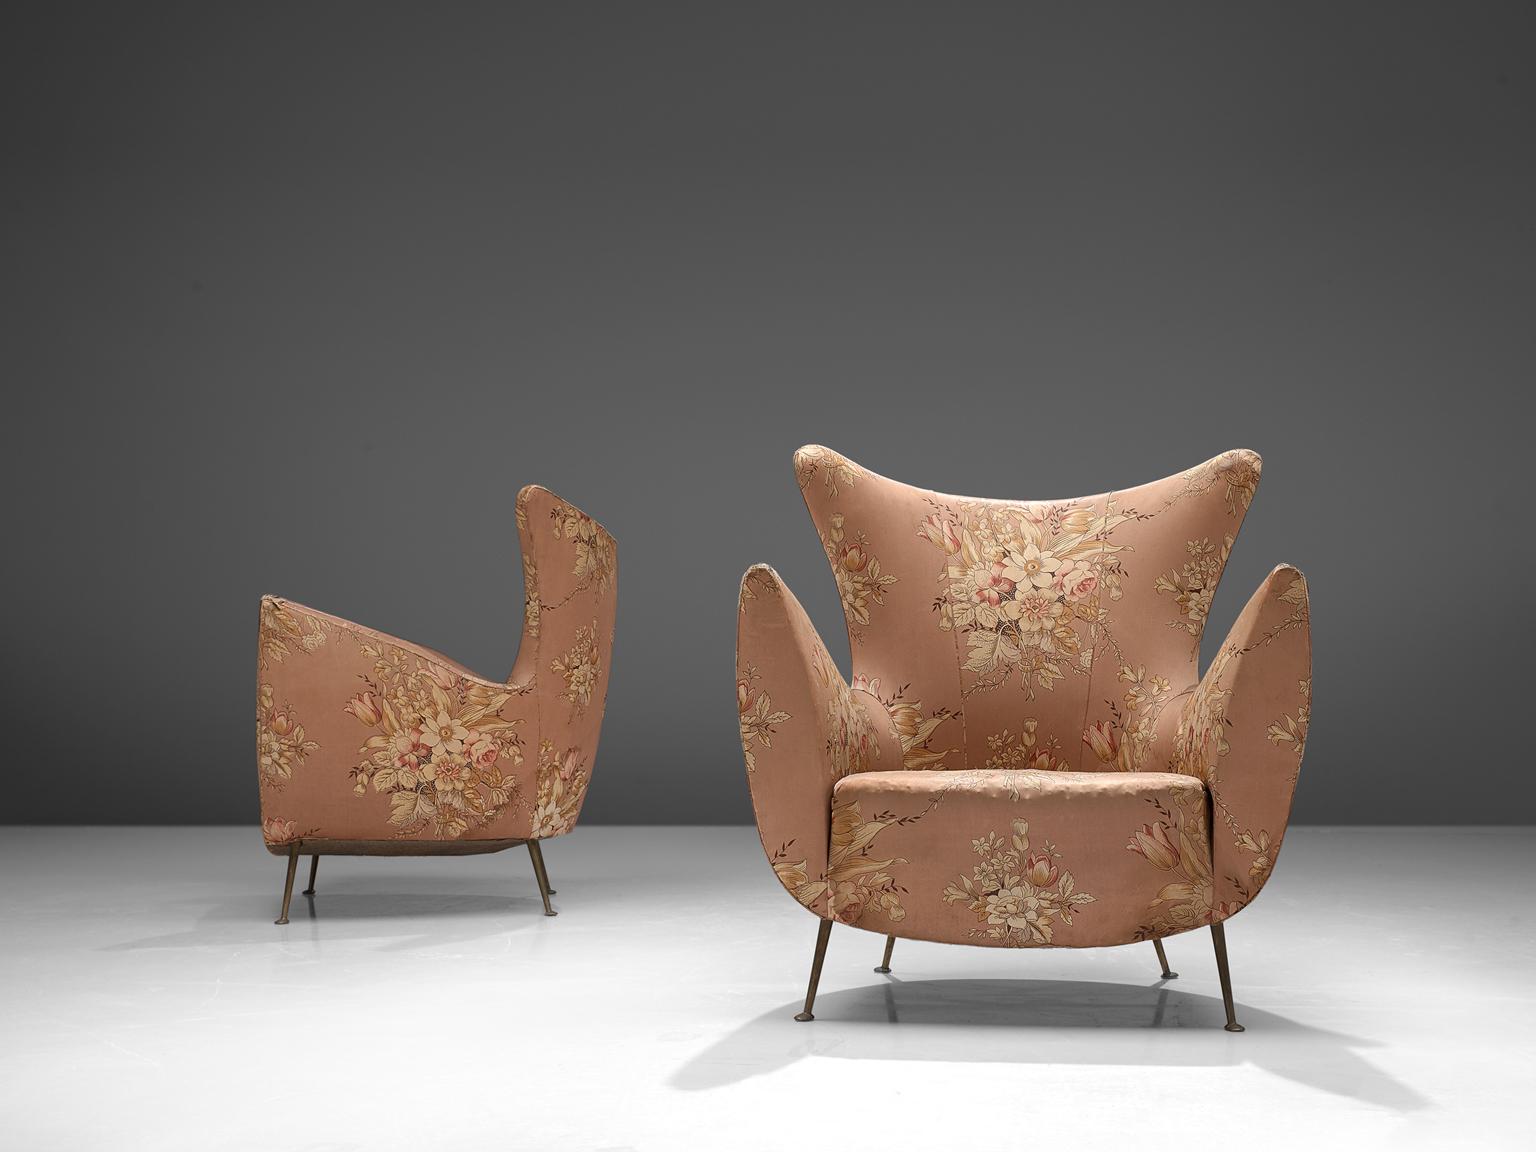 Italian lounge chairs, fabric and metal, Italy, 1950s.

This set of lounge chairs is an iconic example of Italian design from the 1950s. Organic and sculptural, these lounge chairs are anything but minimalistic. Equipped with the original stiletto